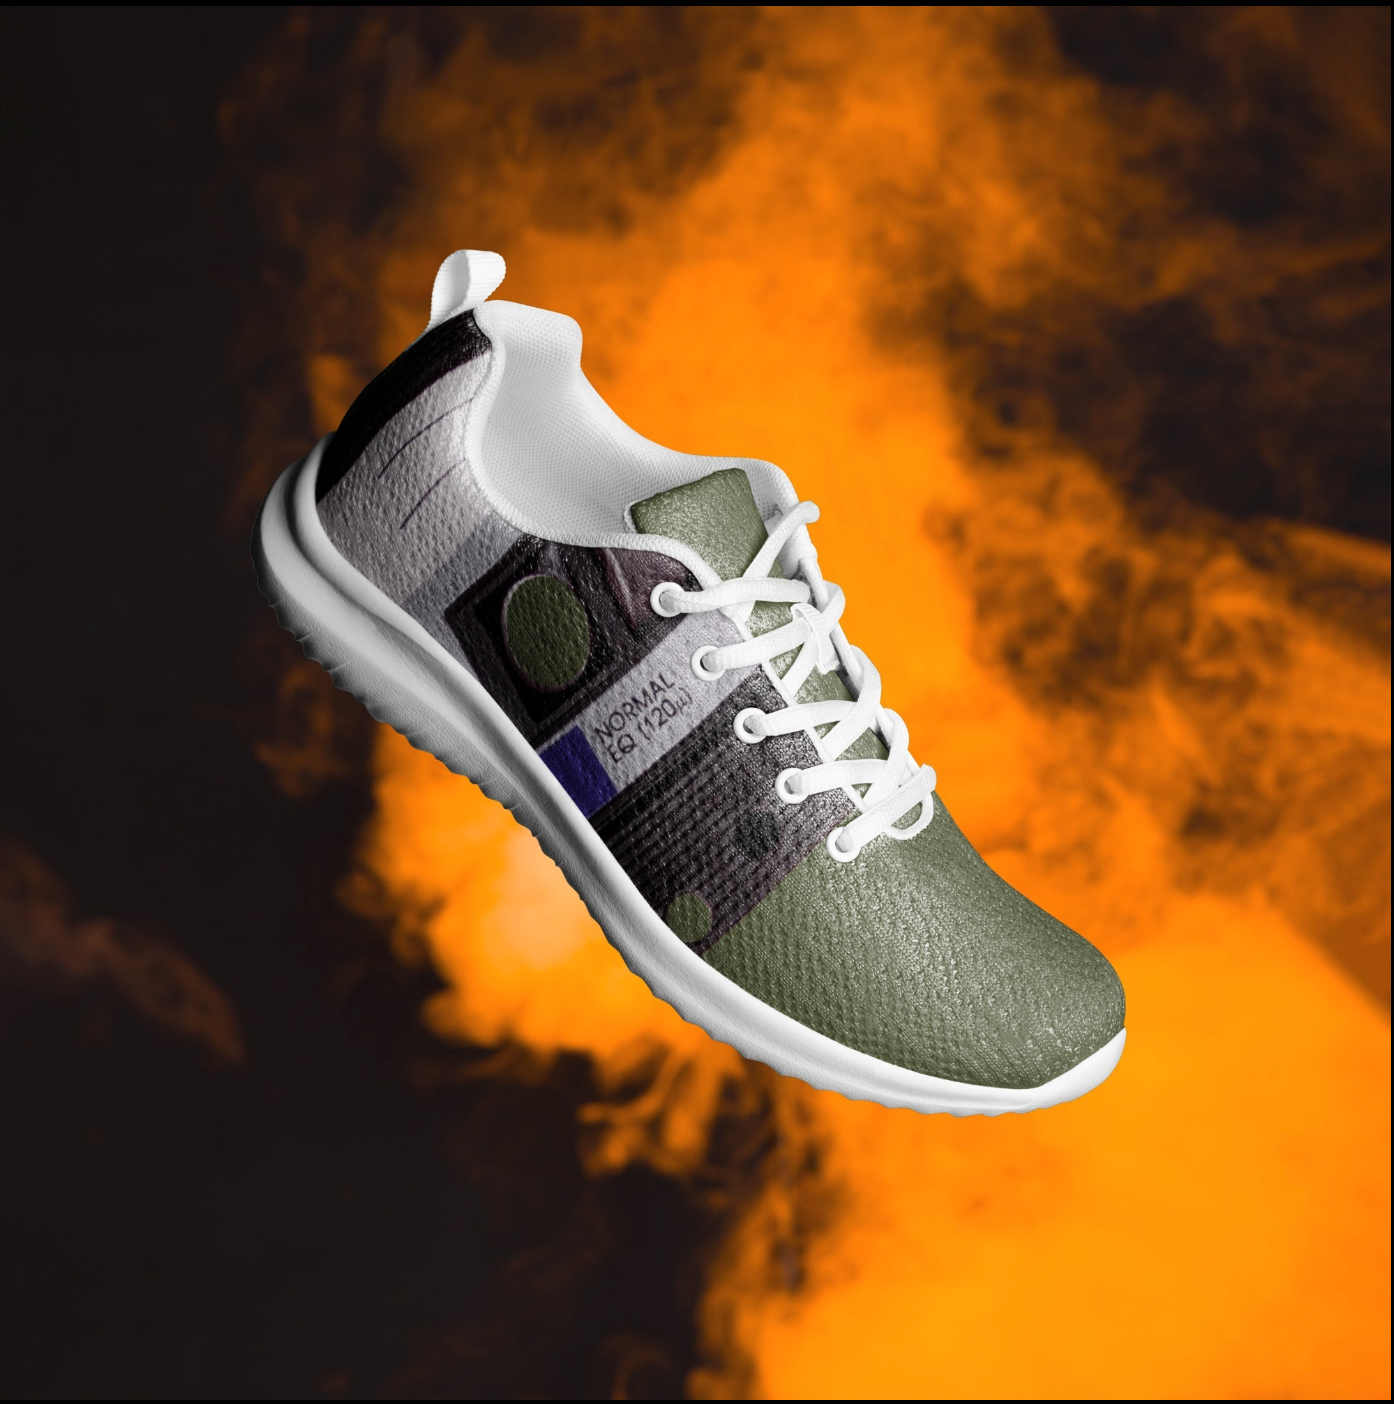 Street Style Sneakers for Men and Unisex - Dark Green